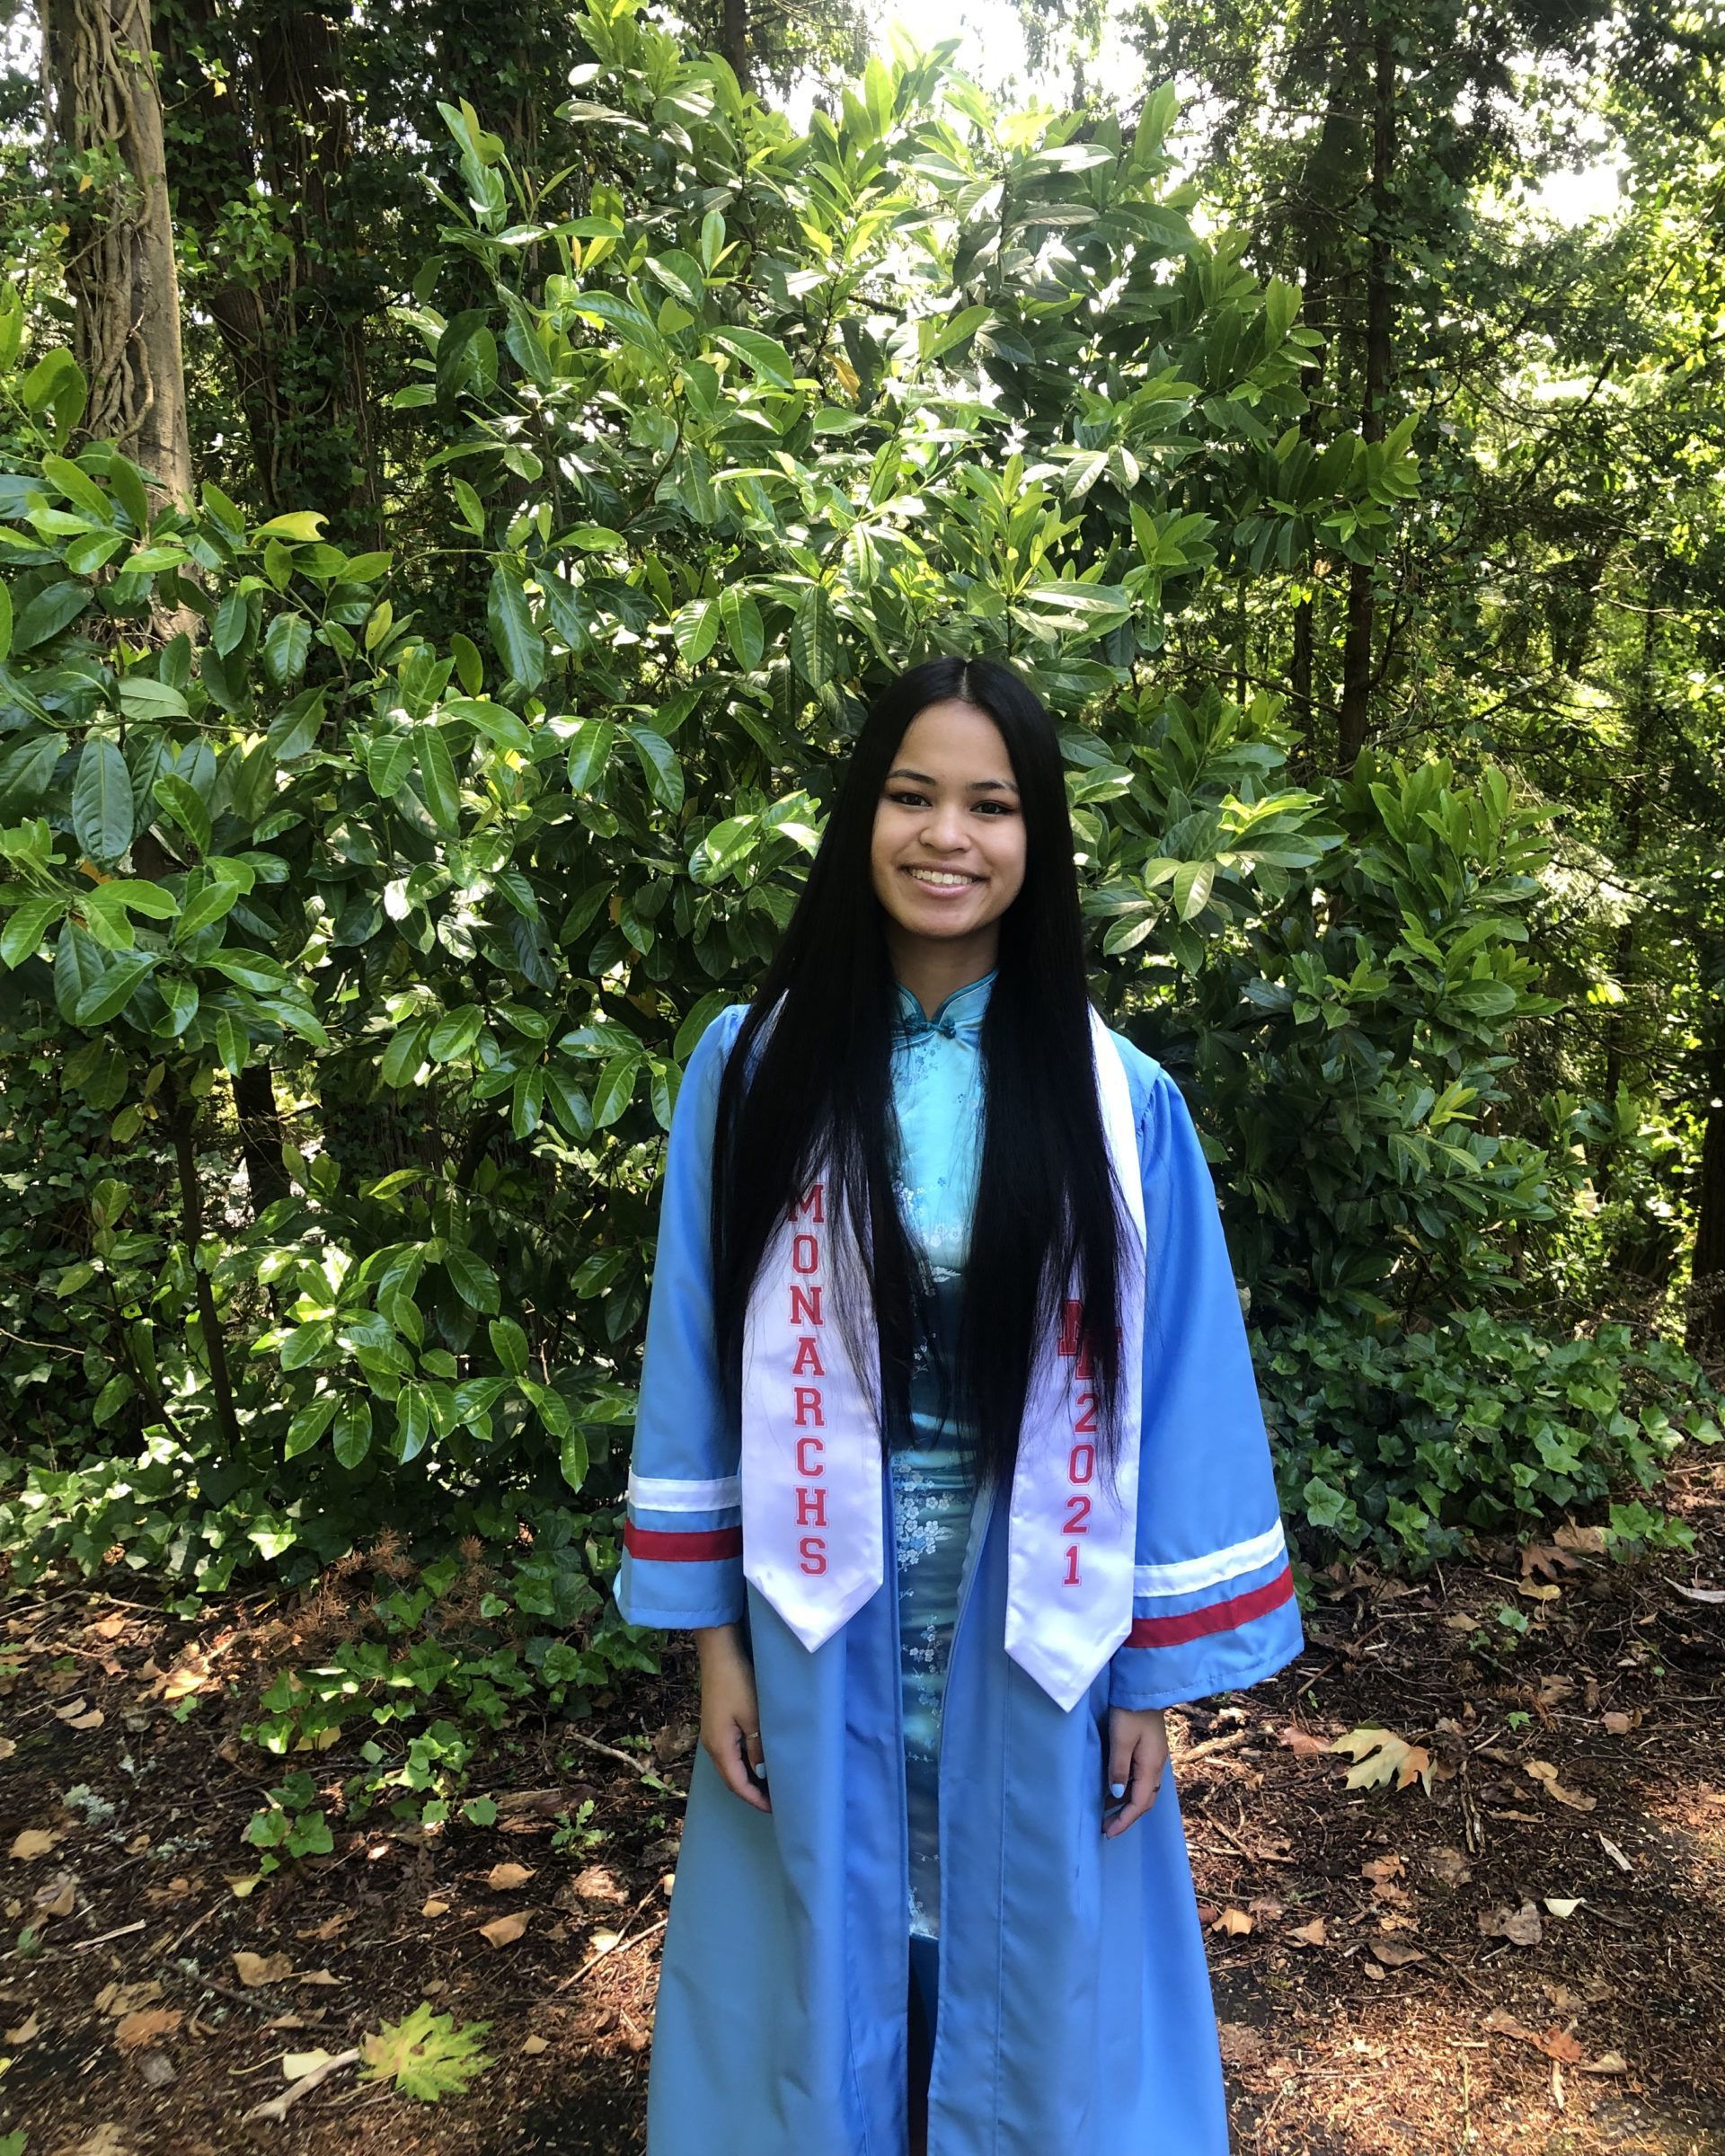 smiling girl in forest wearing blue graduation gown and sash that says "monarchs 2021"